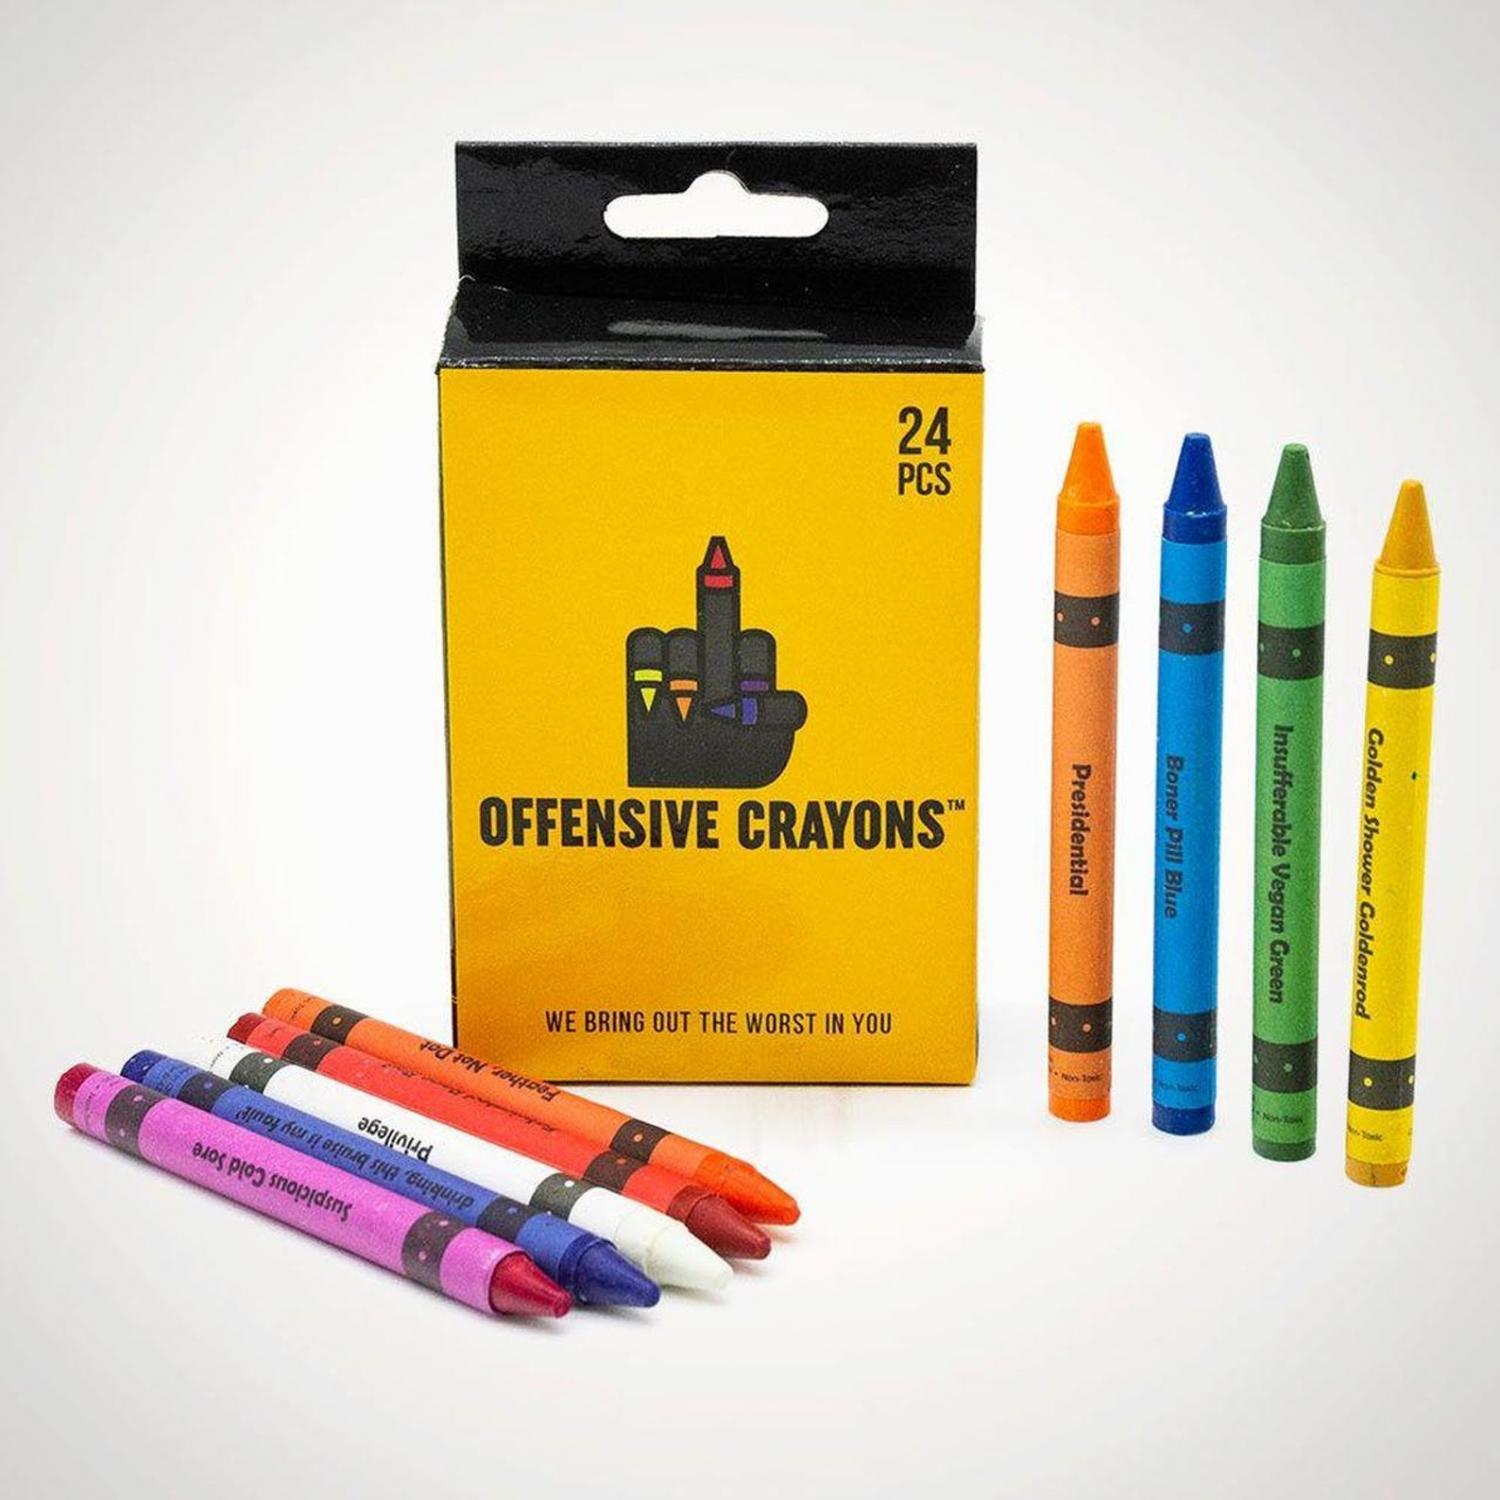 Pack of red, yellow, green, blue, and orange colored Offensive Office crayon Pens